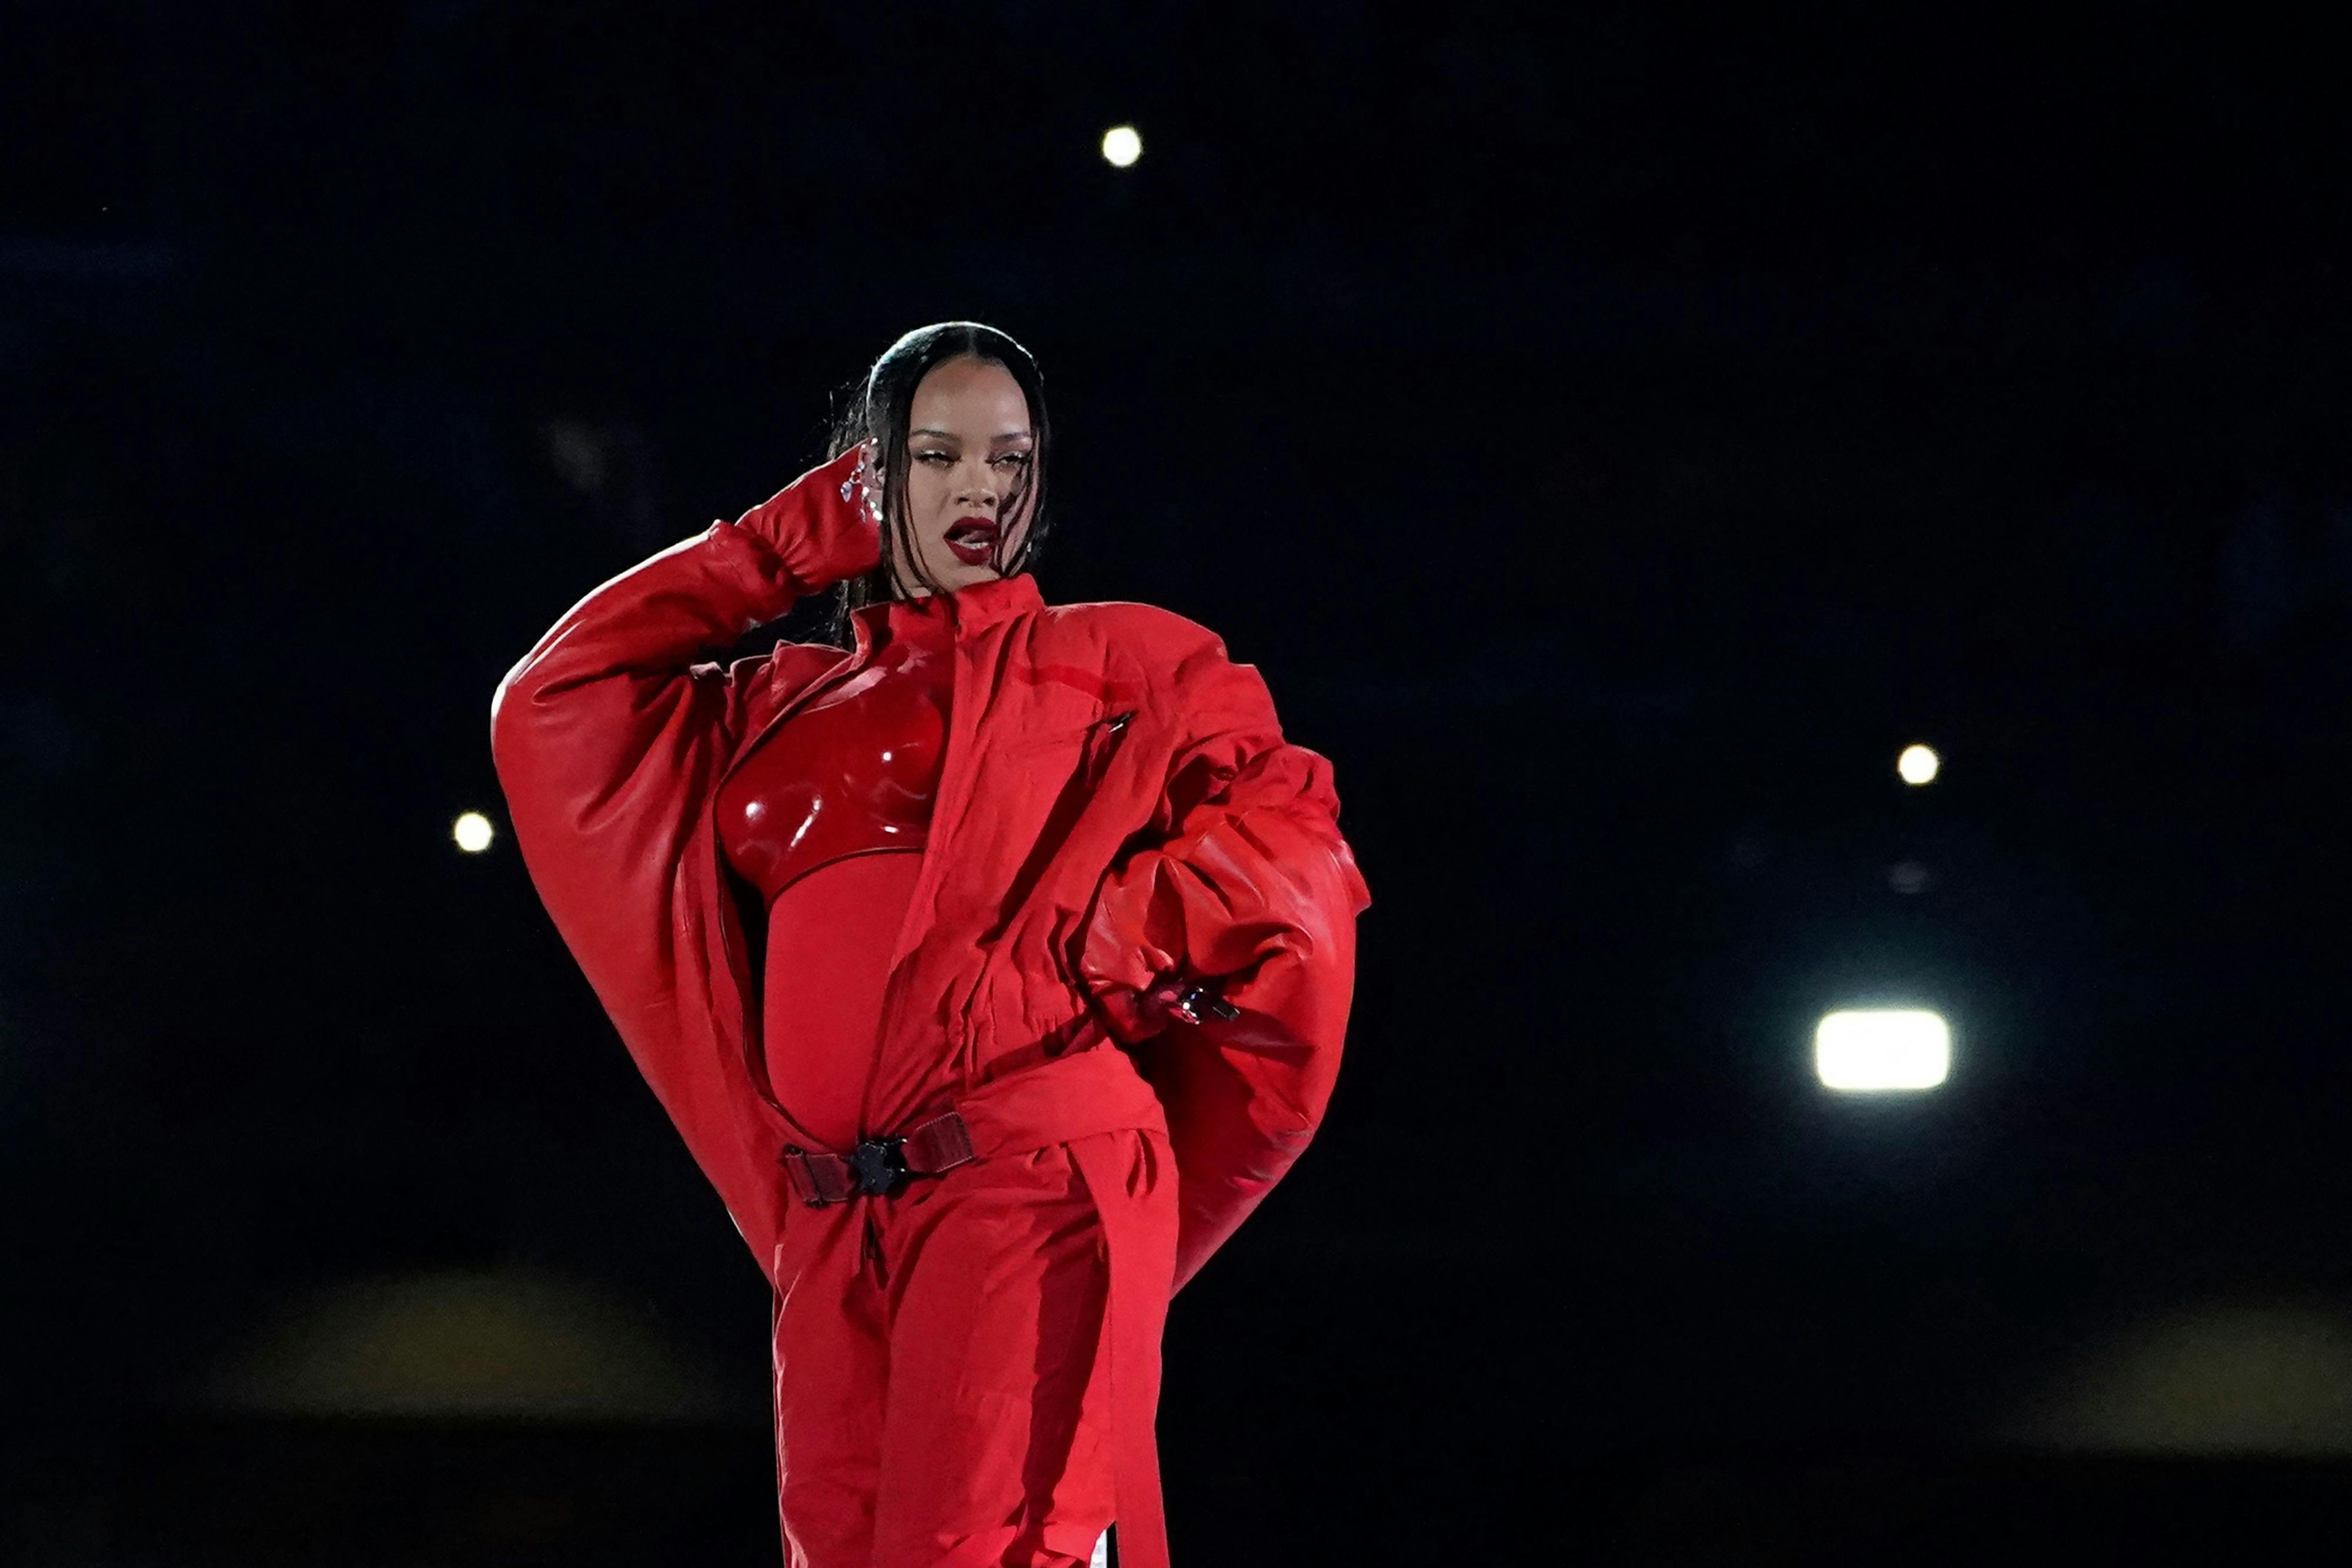 (FILES) Barbadian singer Rihanna performs during the halftime show of Super Bowl LVII between the Kansas City Chiefs and the Philadelphia Eagles at State Farm Stadium in Glendale, Arizona, on February 12, 2023. Rihanna has given birth to a baby boy, her second child with rapper A$AP Rocky, a report said August 21, 2023. (Photo by TIMOTHY A. CLARY / AFP)